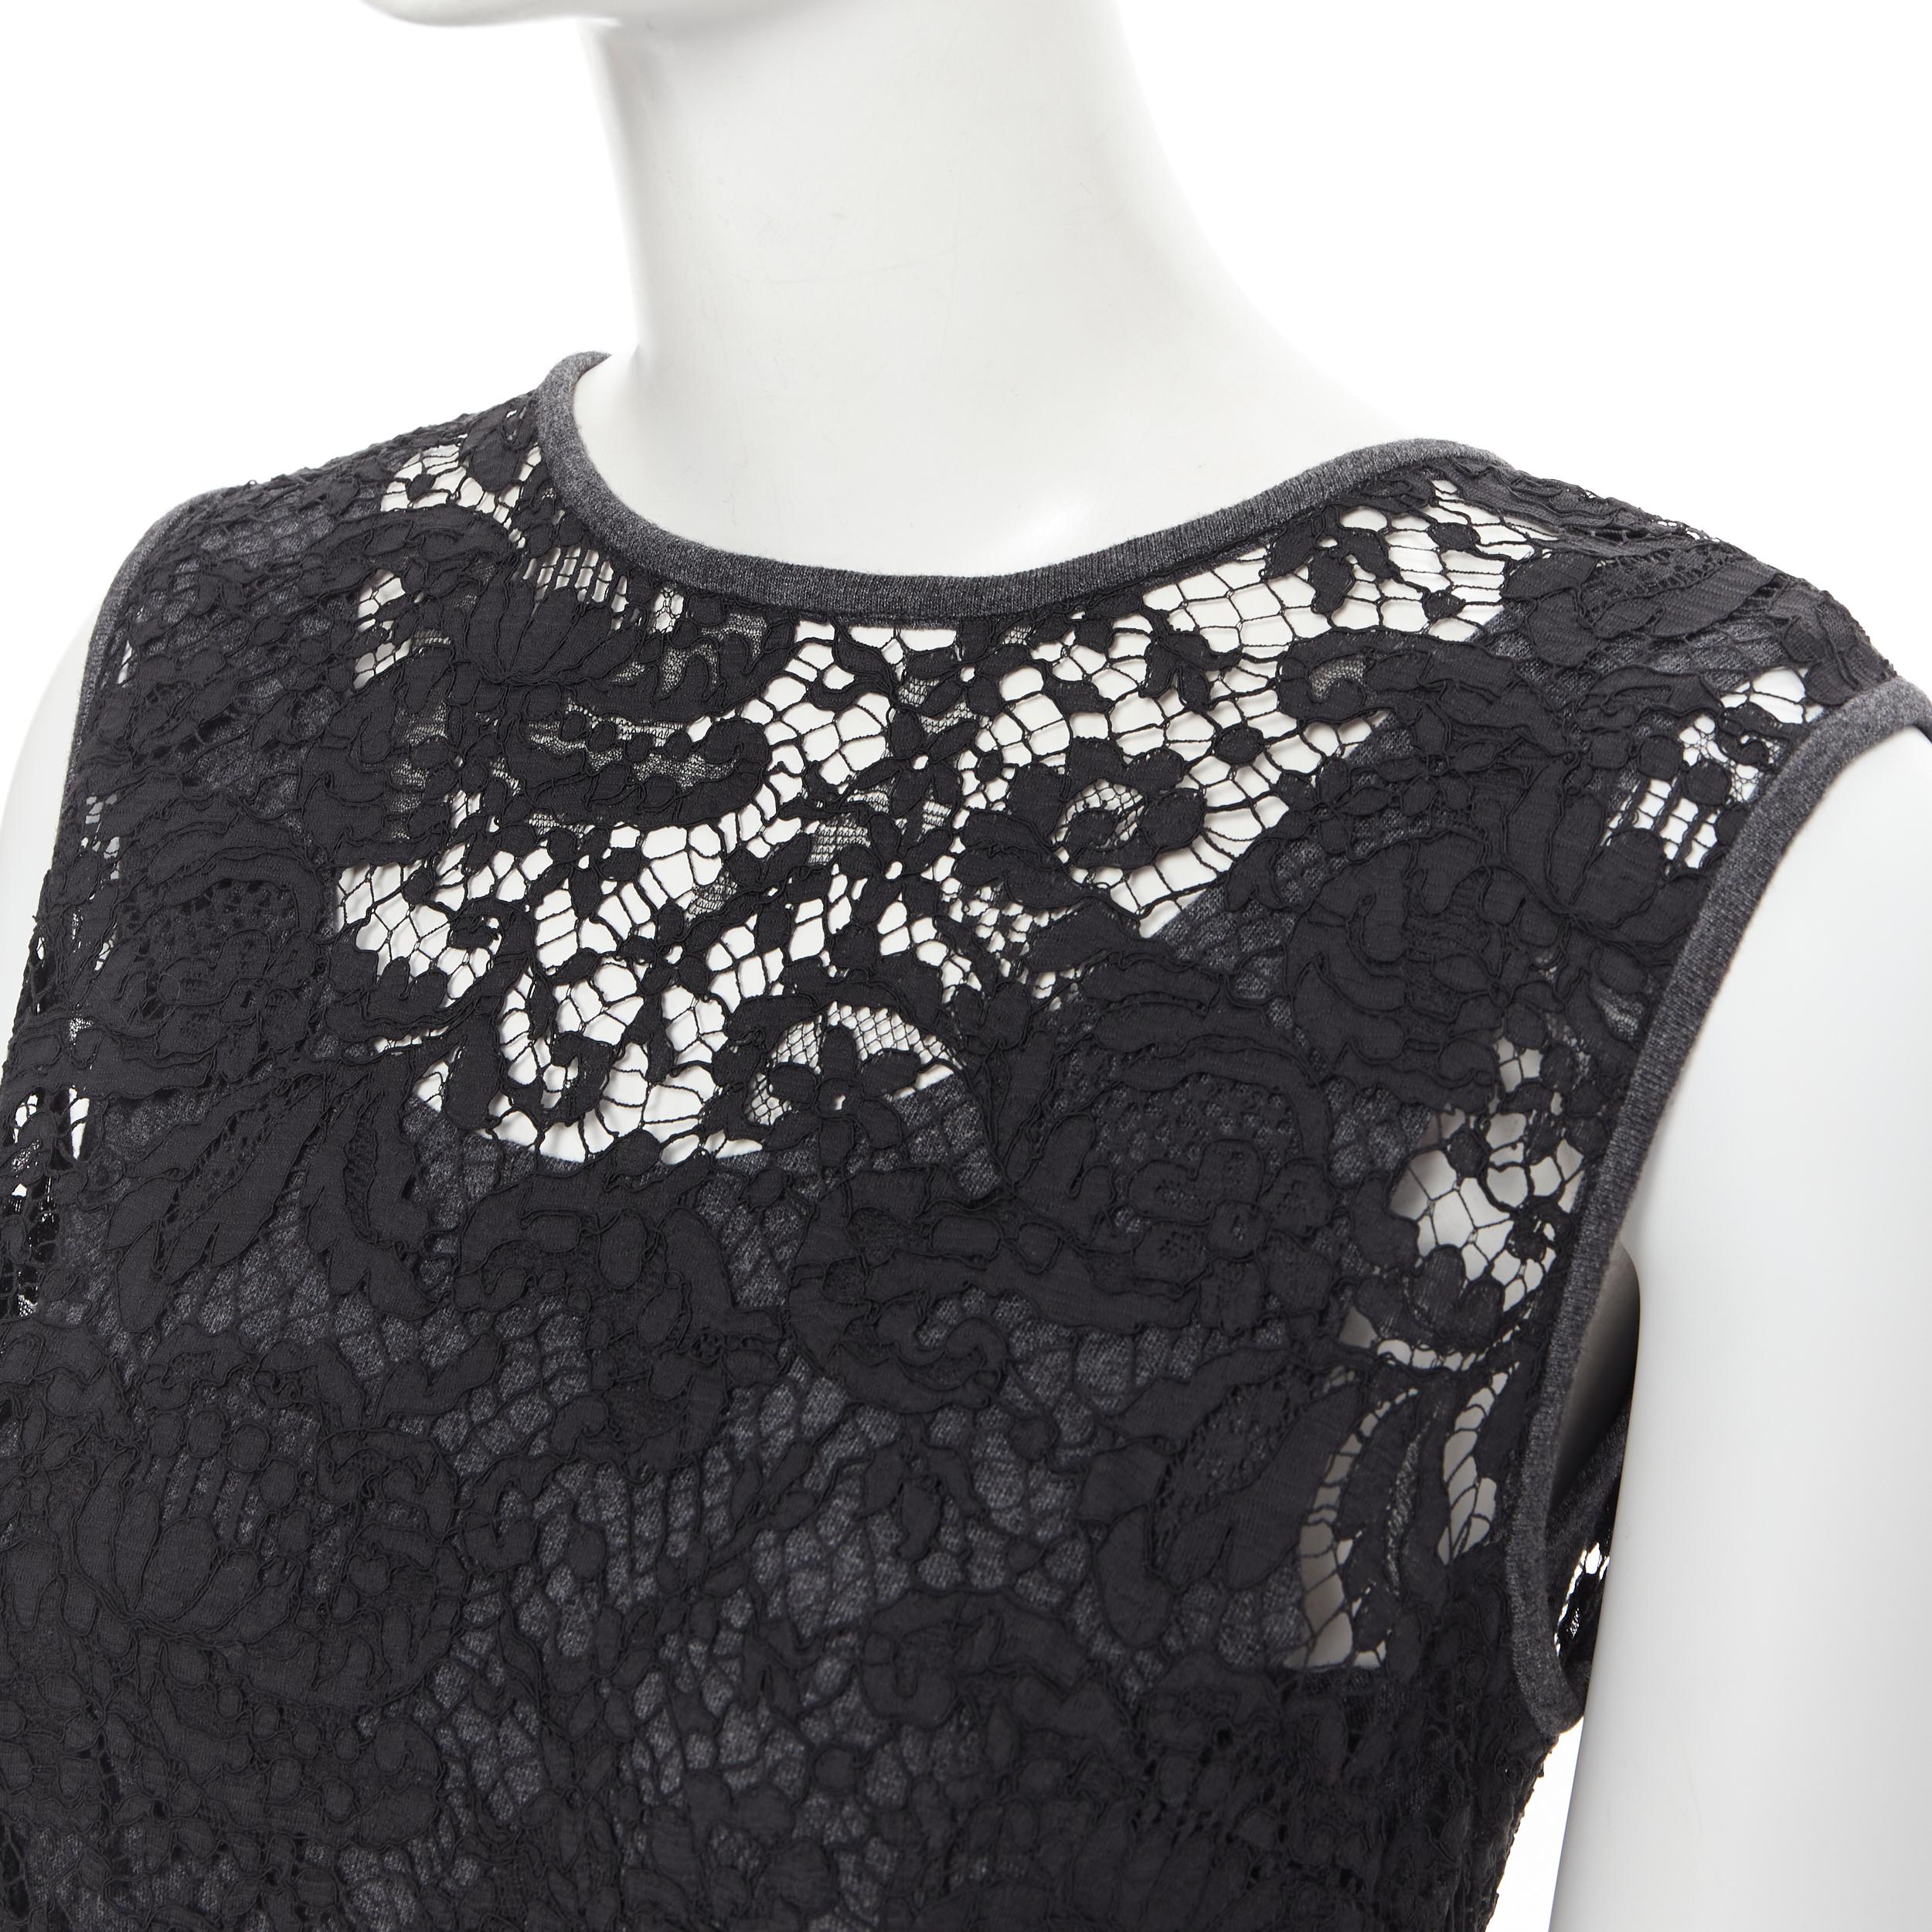 vintage DOLCE GABBANA black floral lace grey jersey lined cocktail dress IT42 M 
Reference: GIYG/A00025 
Brand: Dolce Gabbana 
Material: Cotton 
Color: Black 
Pattern: Floral 
Closure: Zip 
Extra Detail: Floral lace upper. Grey jersey trimming. Grey